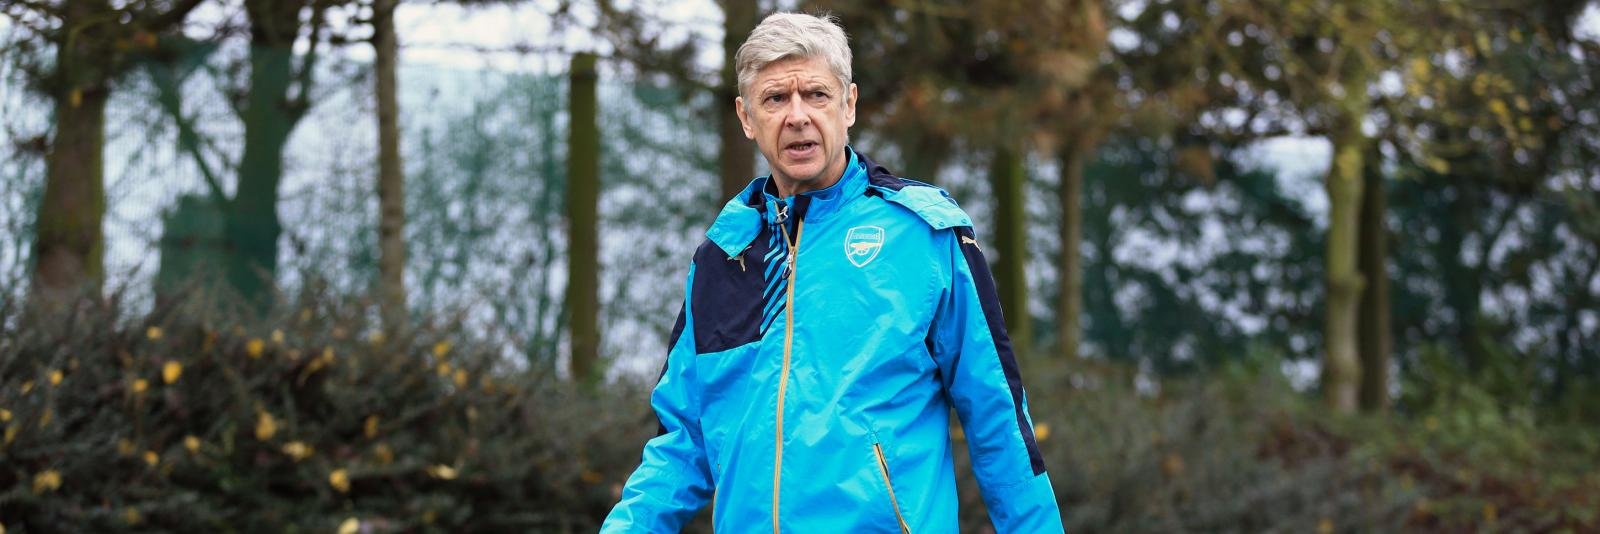 Arsenal poised to snap up 21-year-old Japan starlet